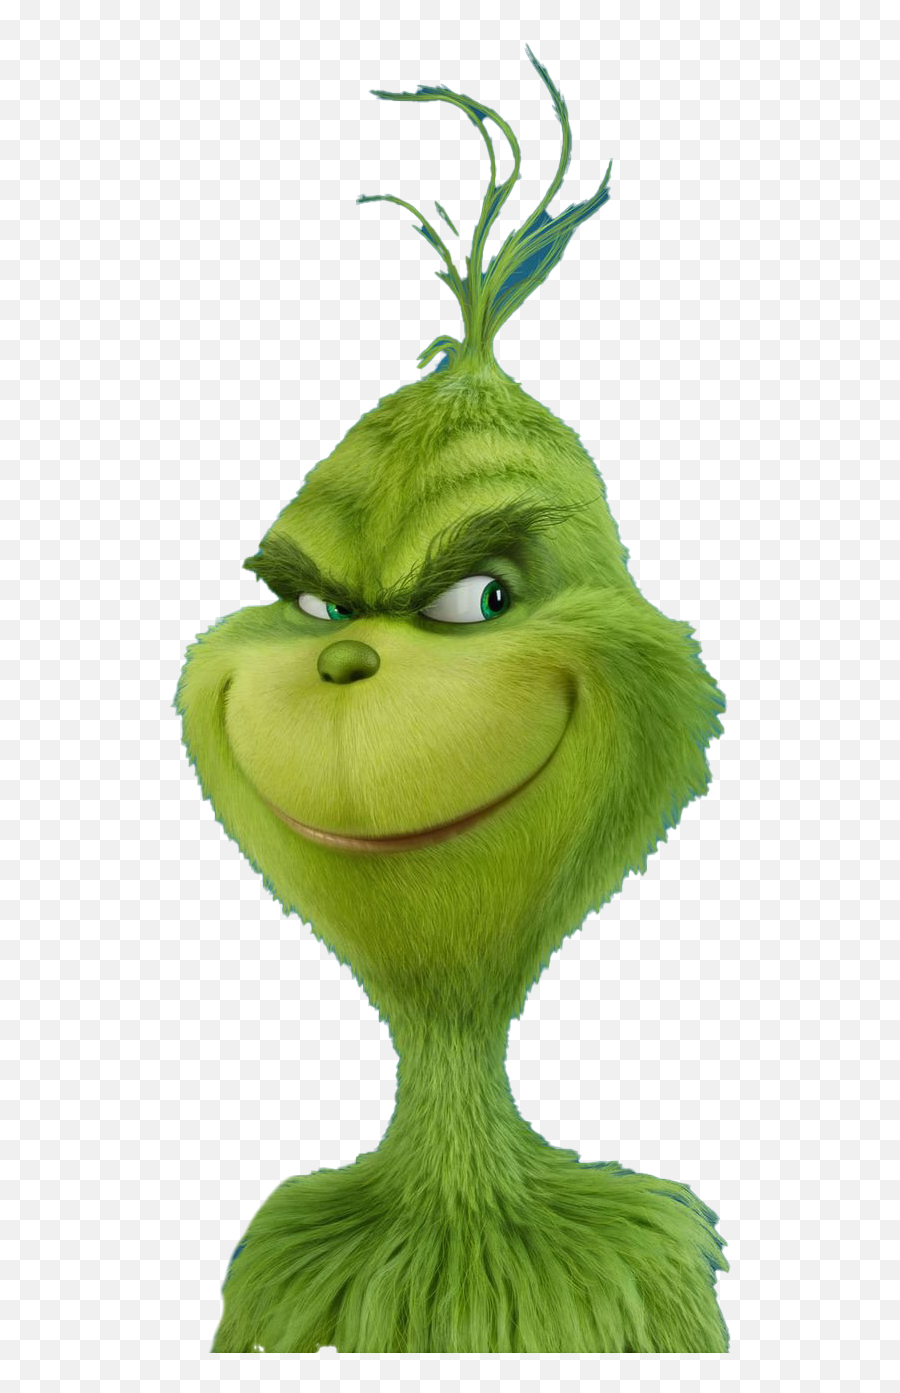 Christmas Grinch Transparent Image - Grinch Who Stole Christmas Png,Grinch Transparent